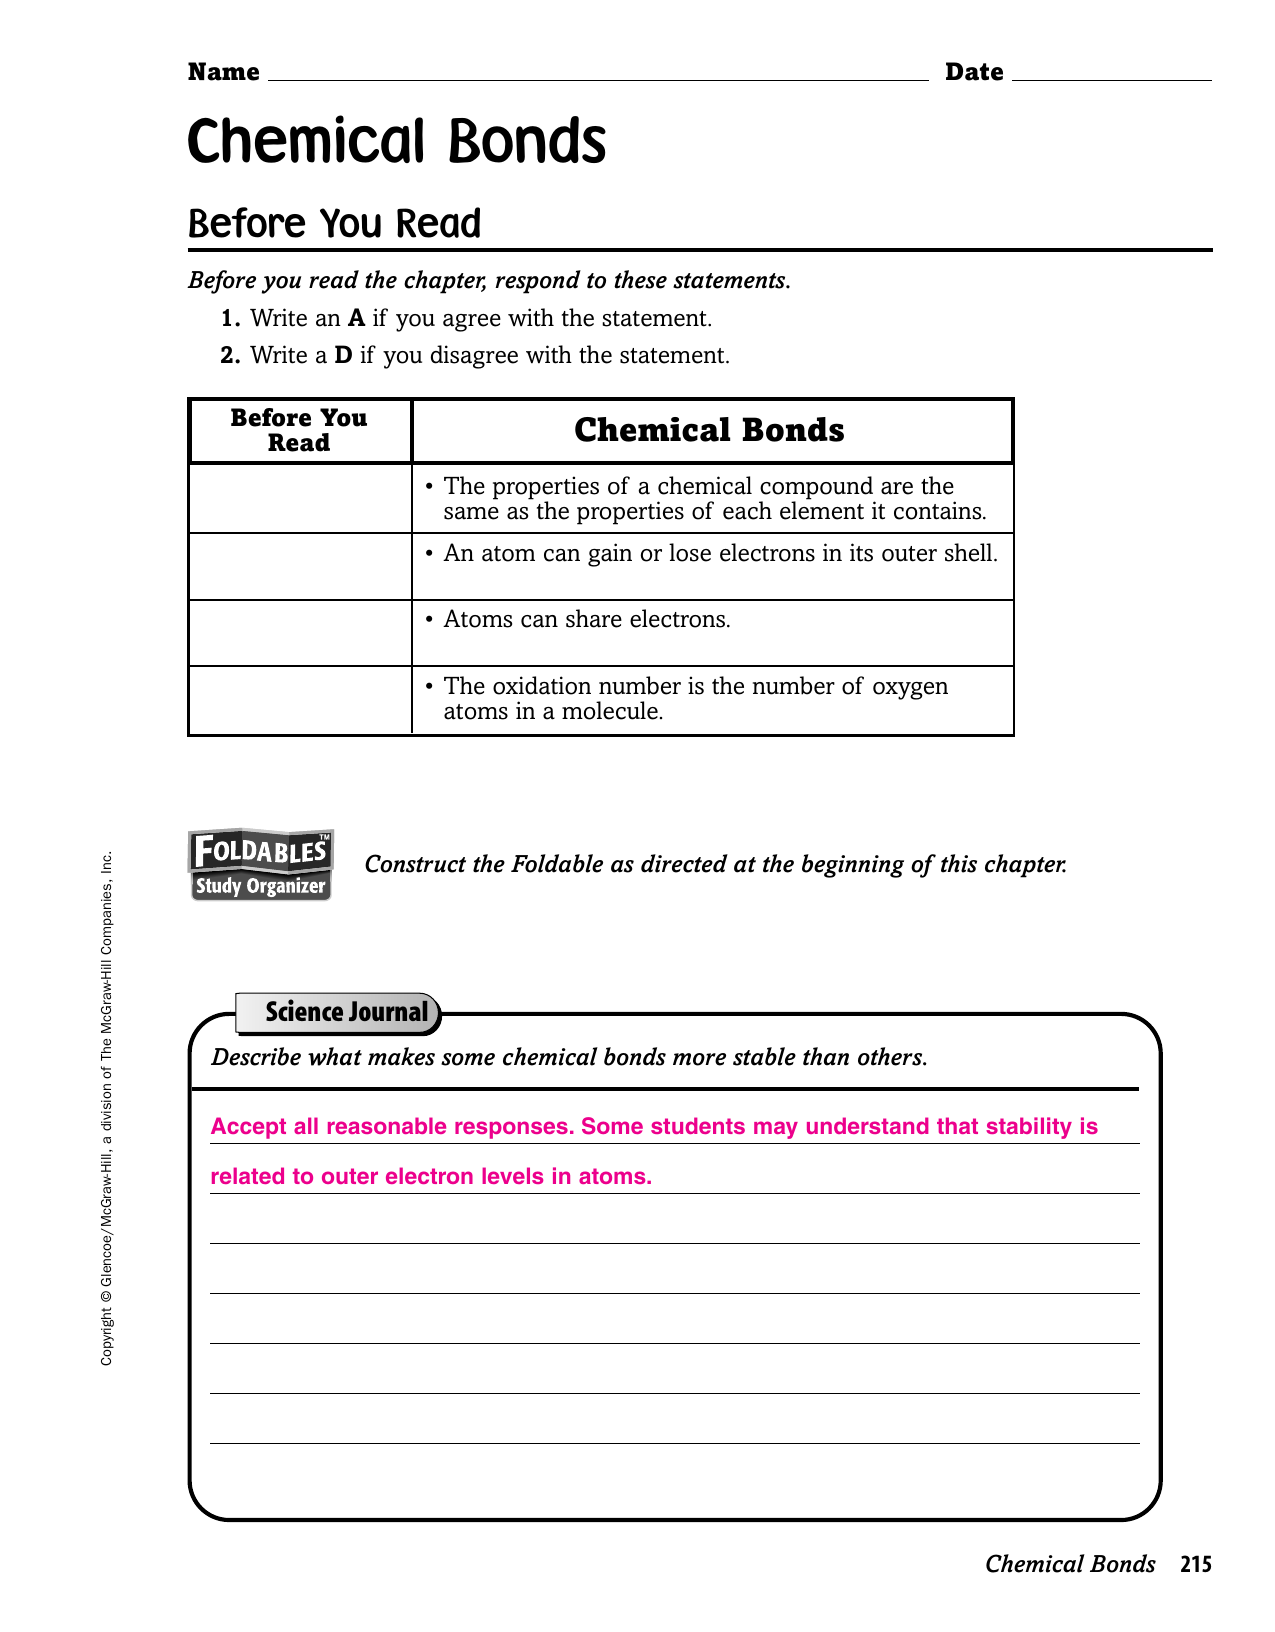 Chemical Bonds With Chemical Bonds Worksheet Answers